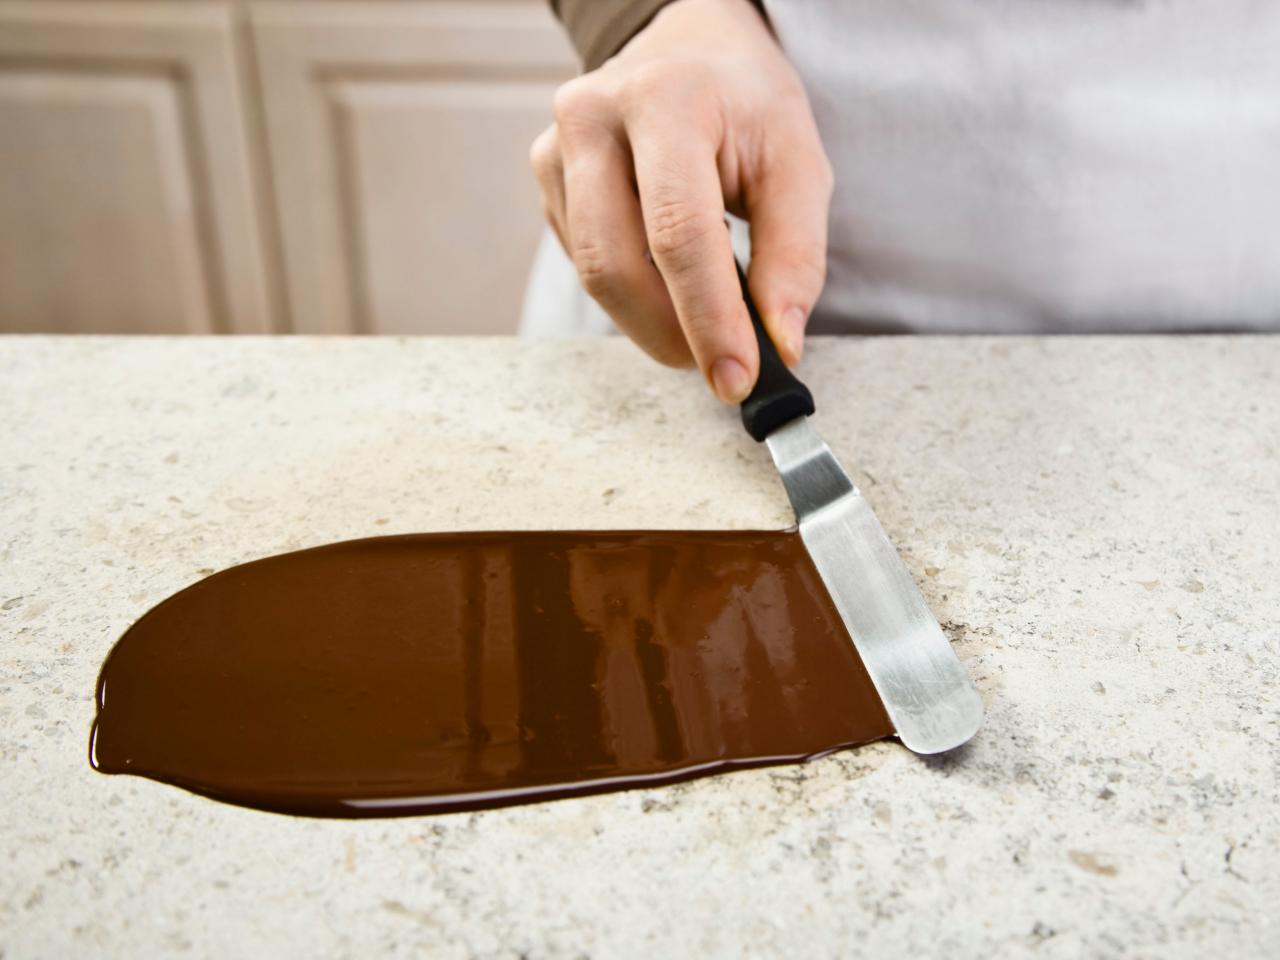 You don't need a thermometer to temper chocolate! I don't know when th